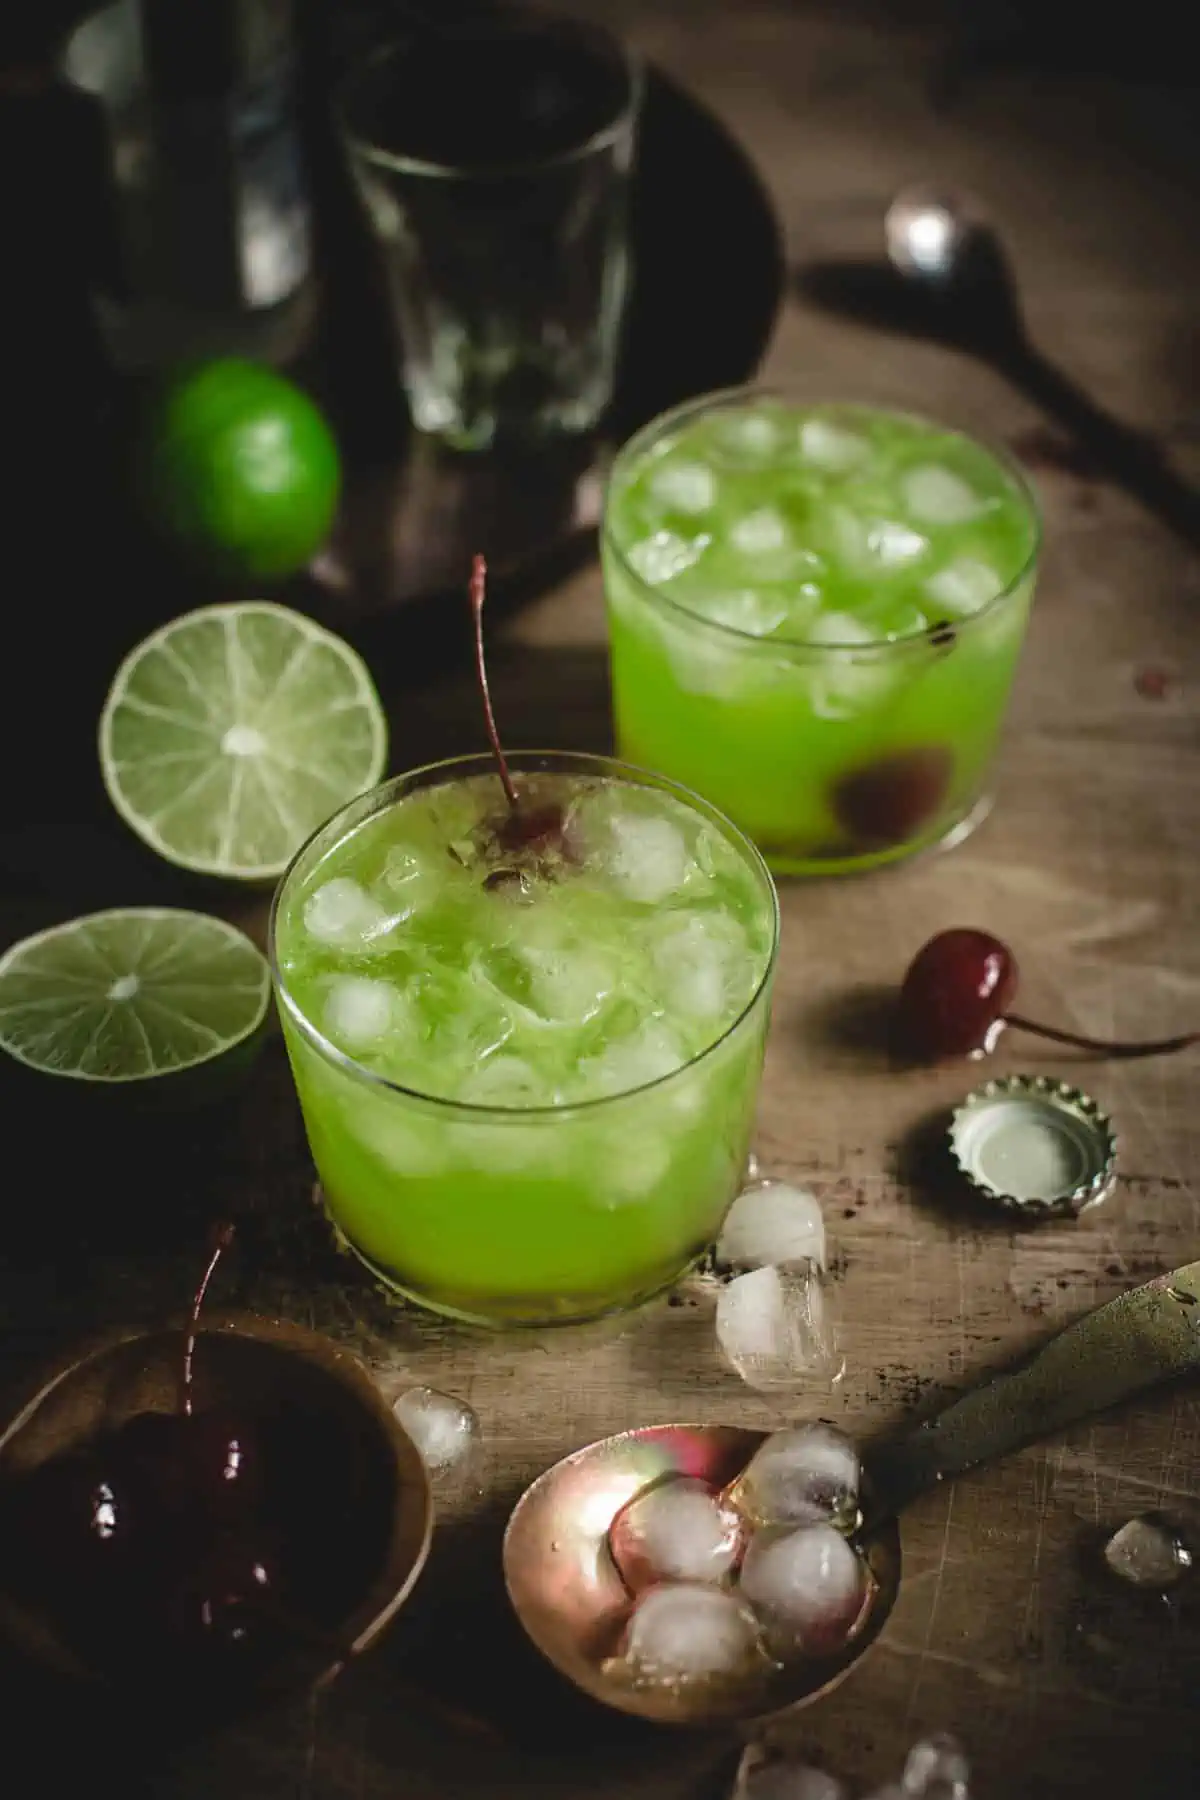 Midori Sour cocktails with cherry garnishes.